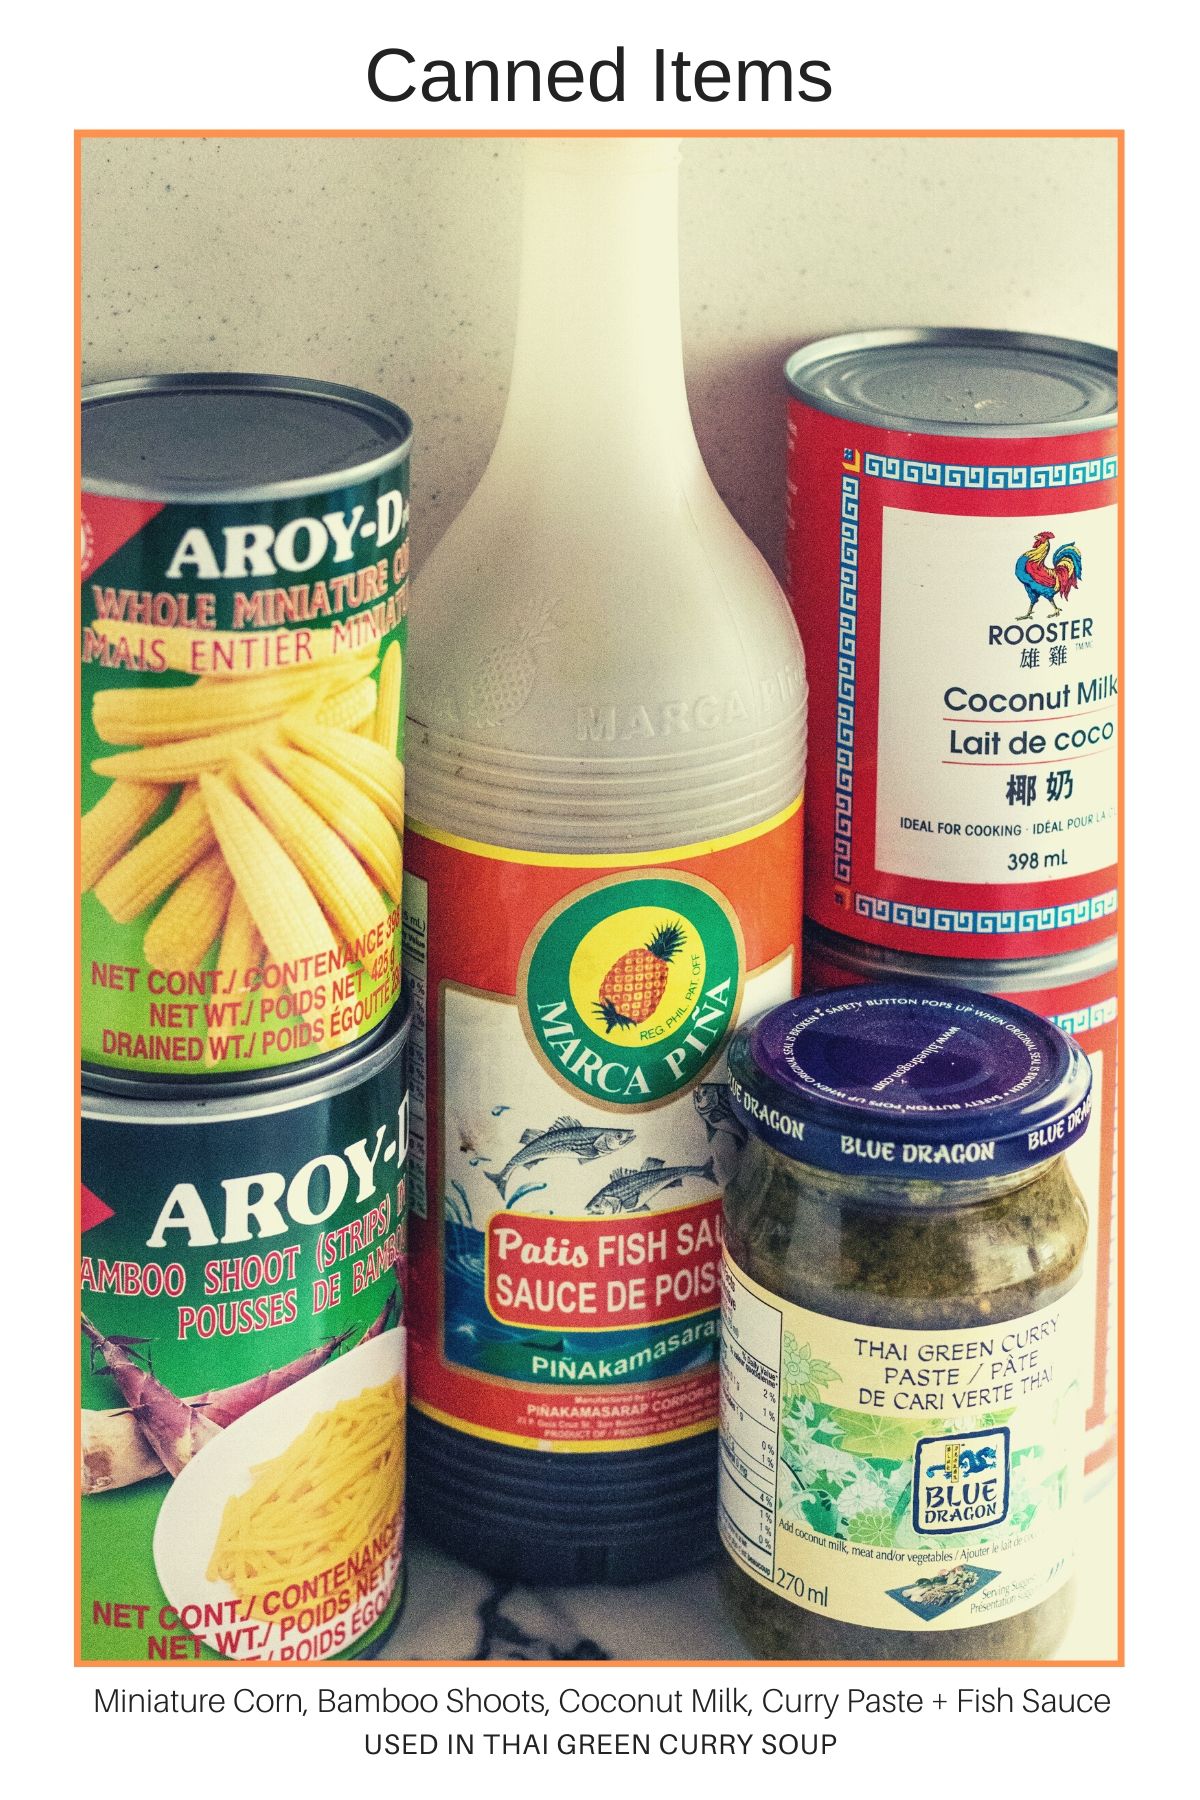 Canned Items for Pantry meals